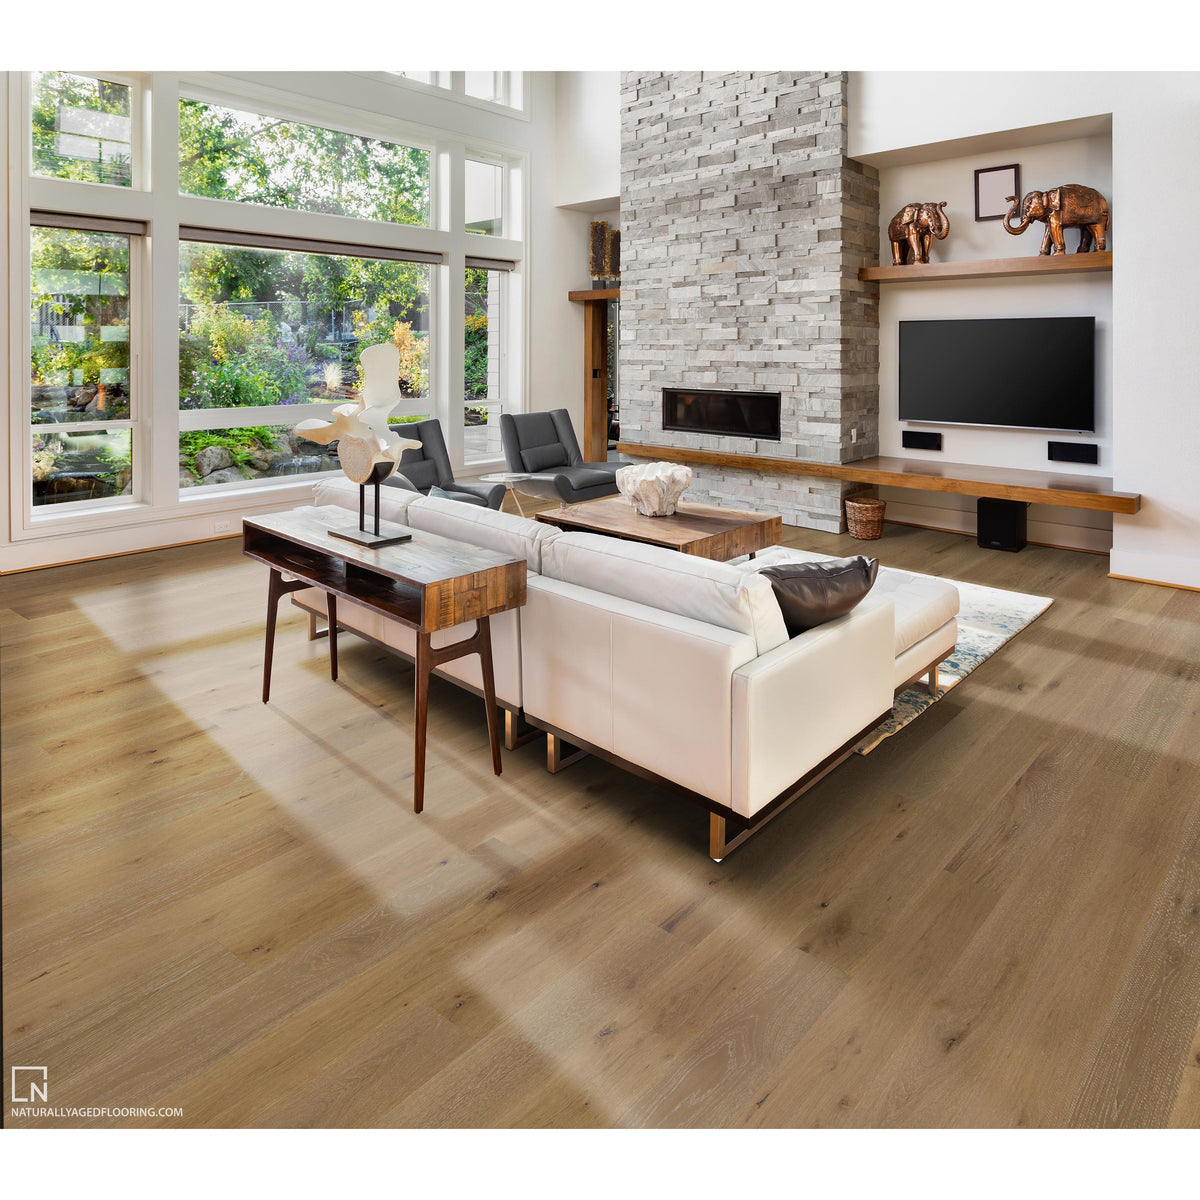 Naturally Aged Flooring - Pinnacle Collection - Crown Room scene